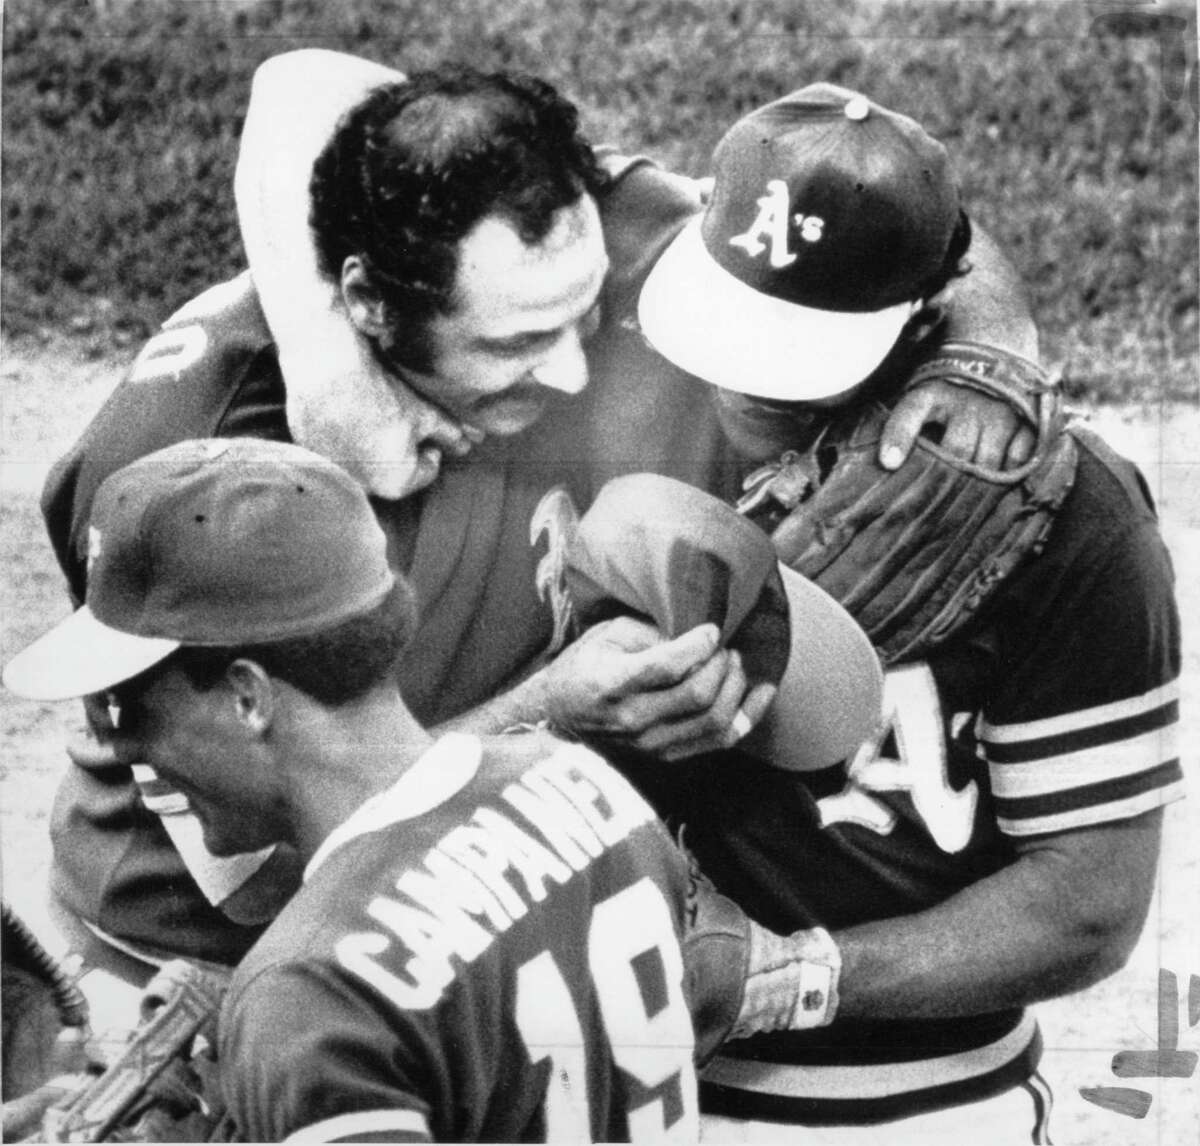 Oakland Athletics players Campy Campaneris, Sal Bando, without cap, and Gene Tenace celebrate after defeating the Baltimore Orioles October 7, 1973 Photo ran 10/08/1973, p. 45 United Press International photo